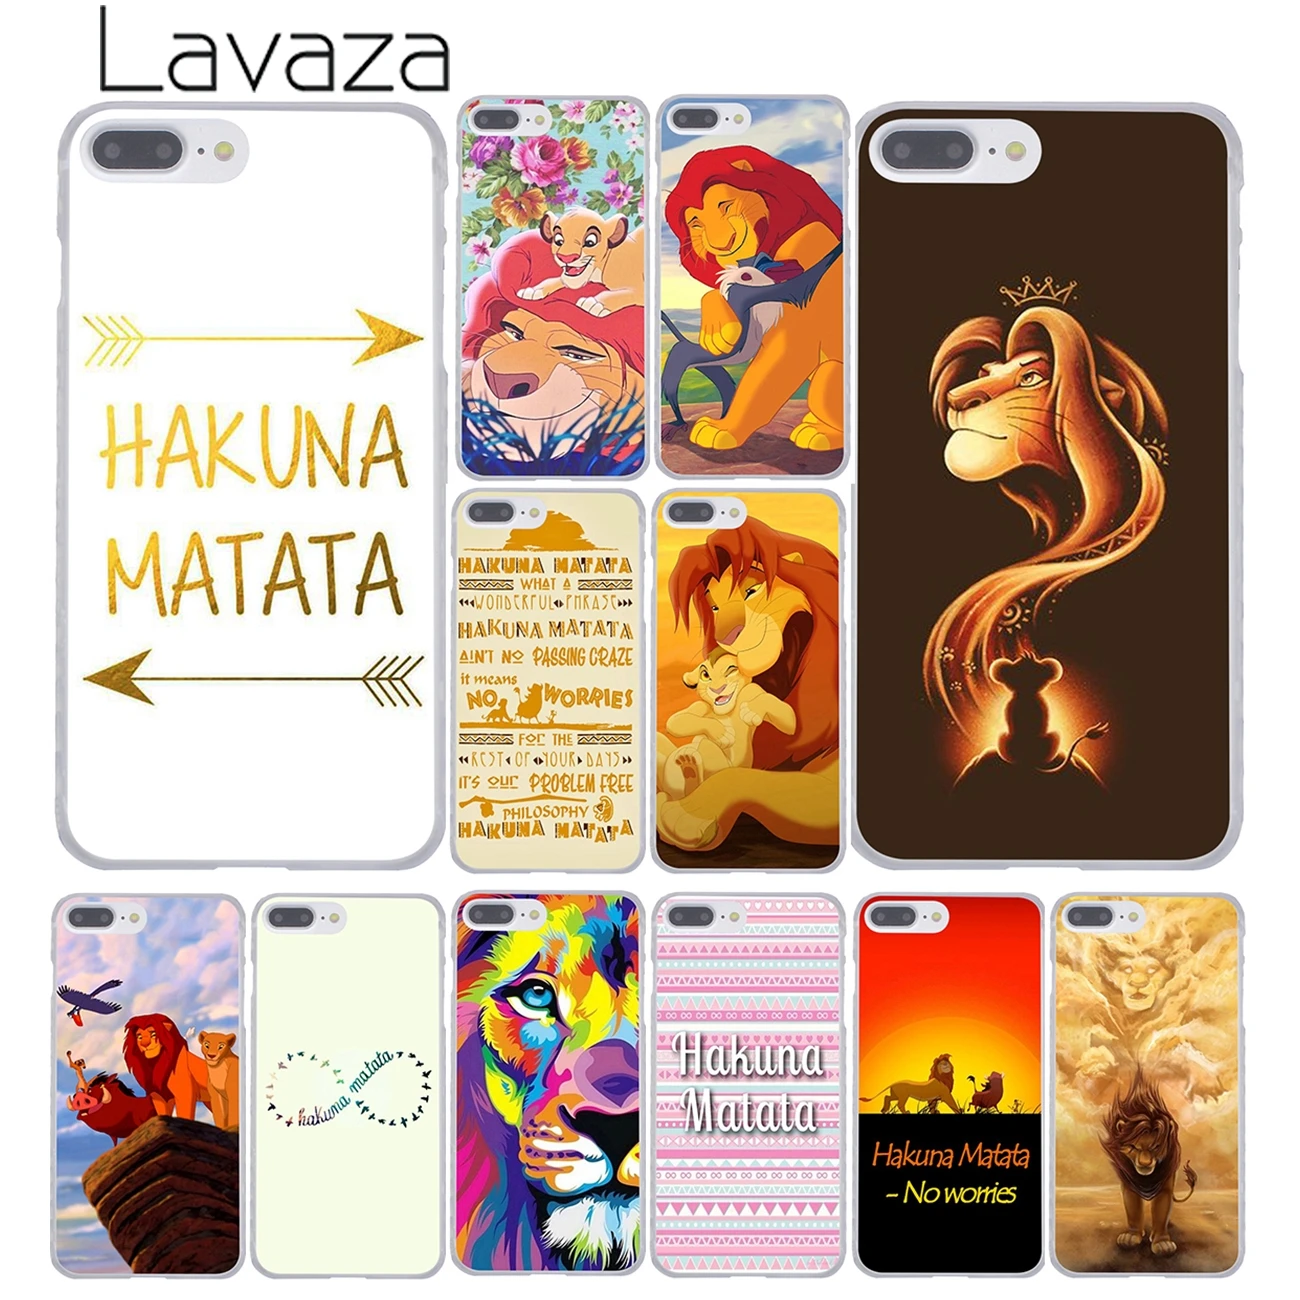 

Lavaza The Hakuna Matata Lion King Hard Phone Cover Case for iPhone XR X 11 Pro XS Max 8 7 6 6S 5 5S SE 4S 4 10